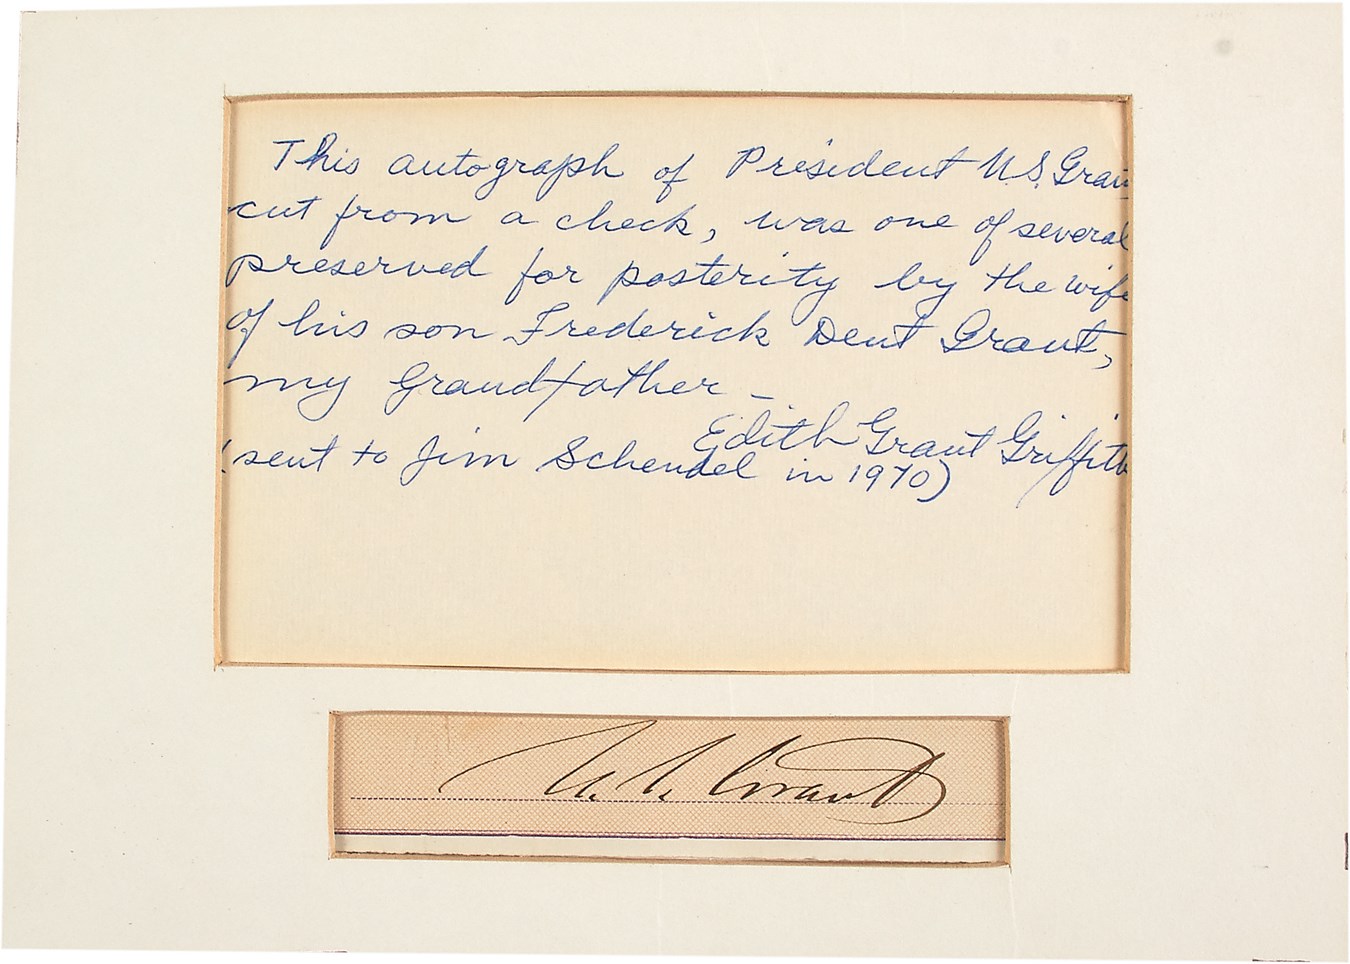 - Ulysses S. Grant Autograph Gifted by Grant's Granddaughter (PSA)